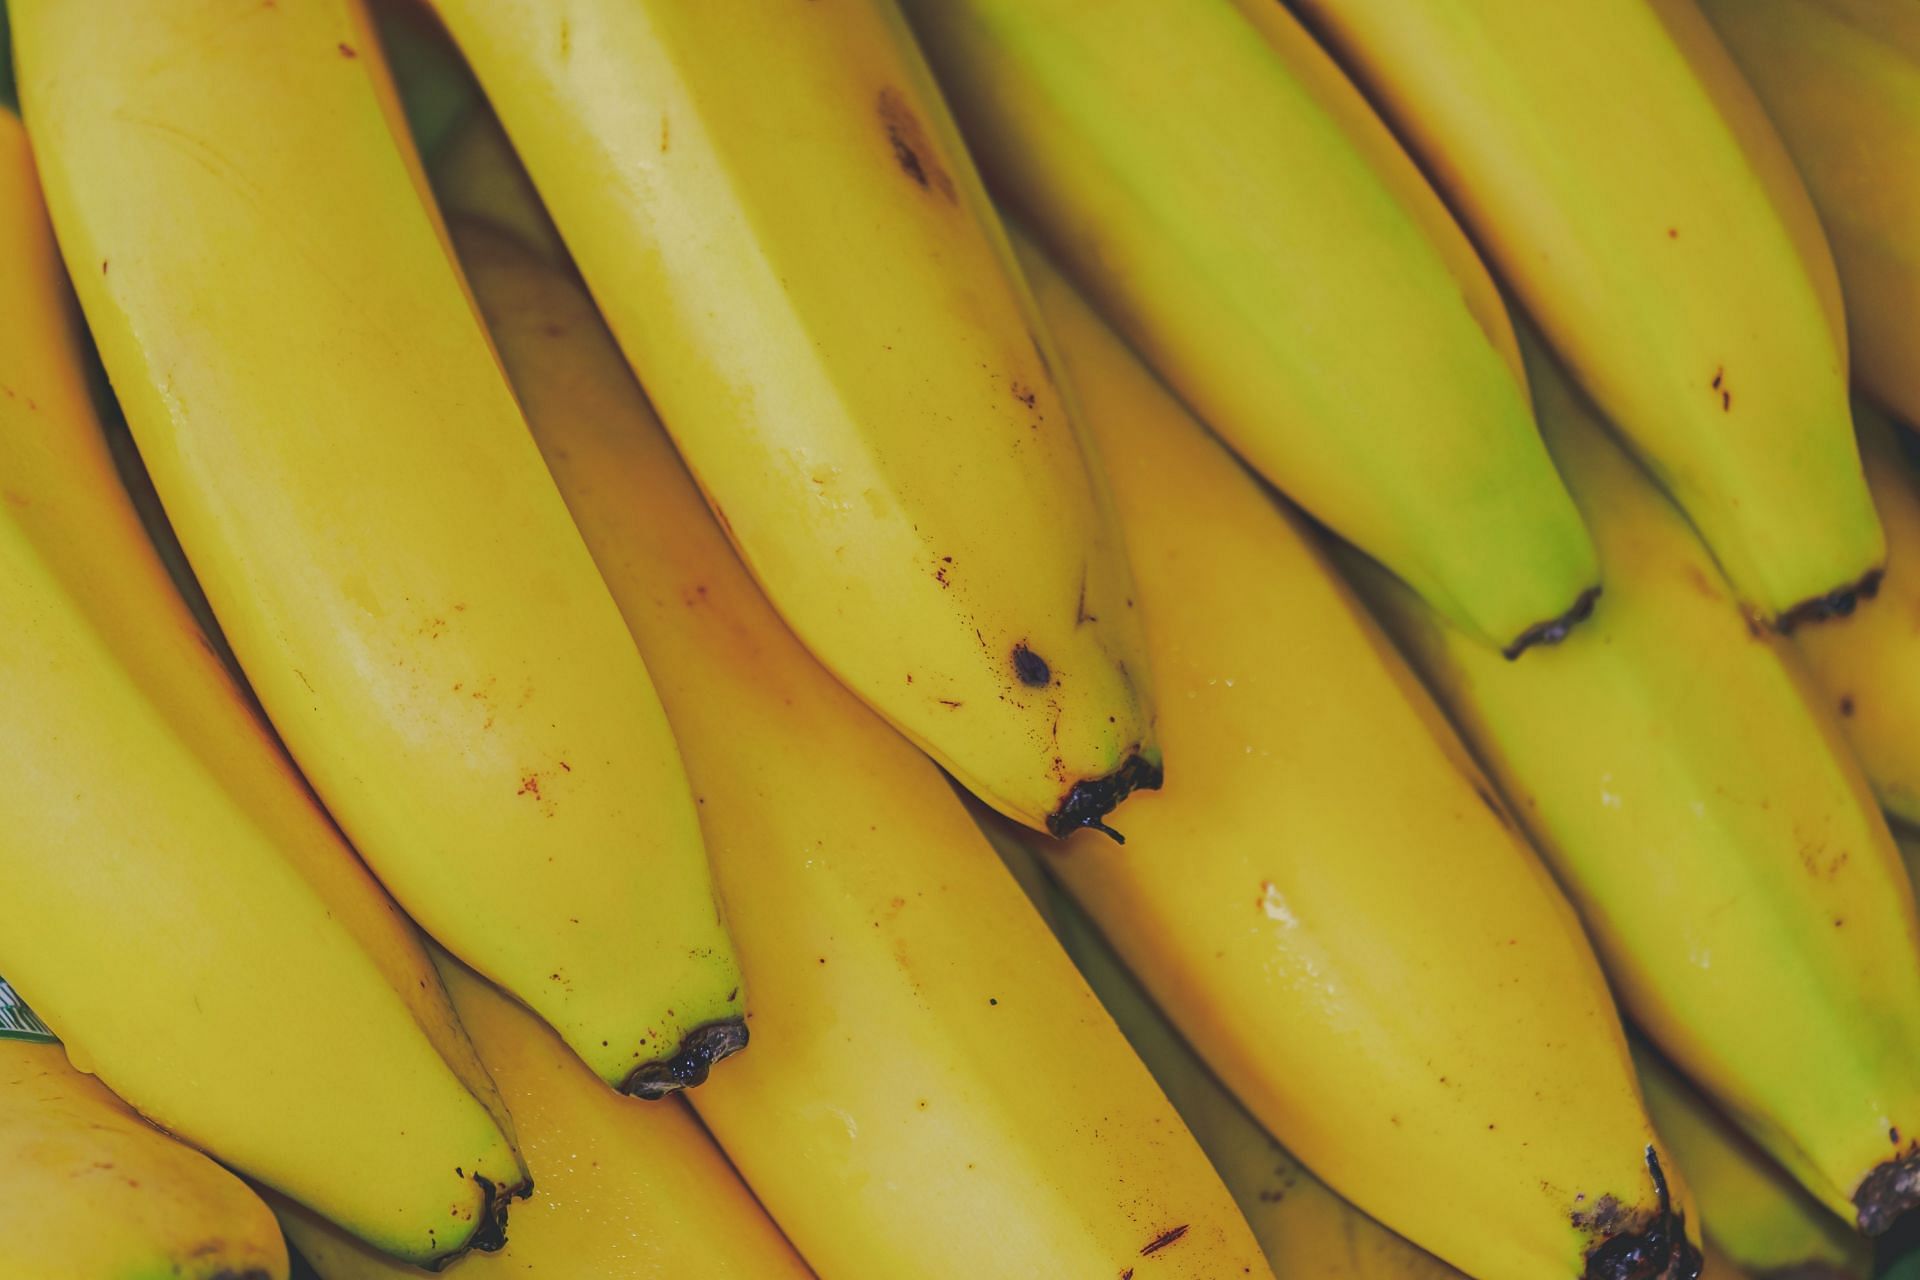 Potassium is good for regulating blood pressure. (Photo by Couleur on Pexels)